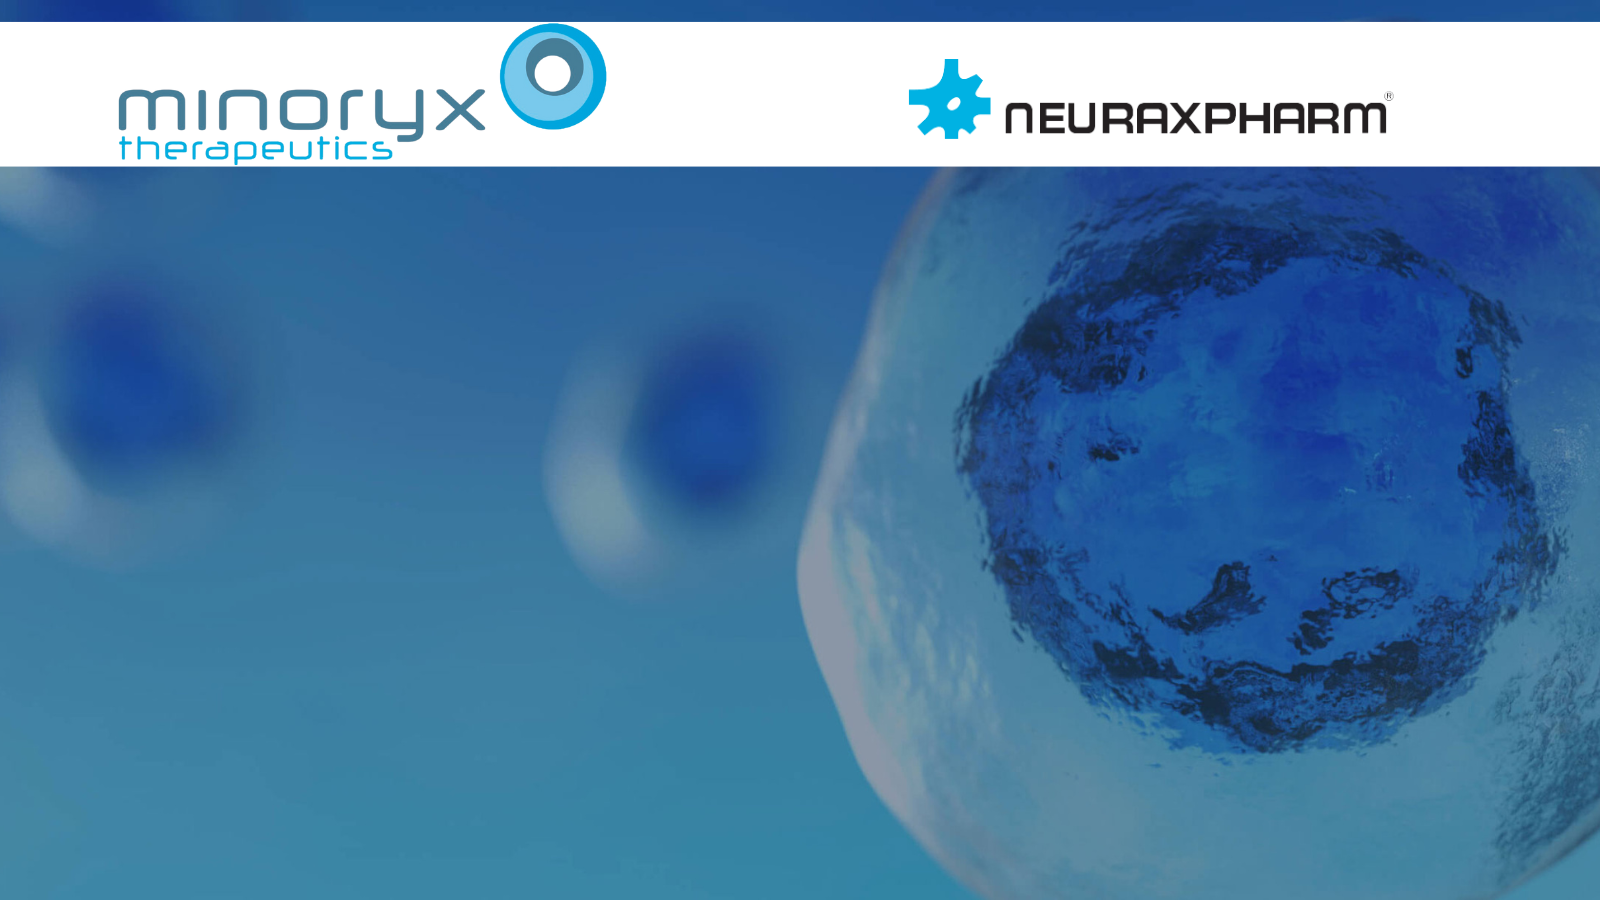 Minoryx and Neuraxpharm announce a strategic alliance to provide a new therapy for rare CNS disease patients in Europe